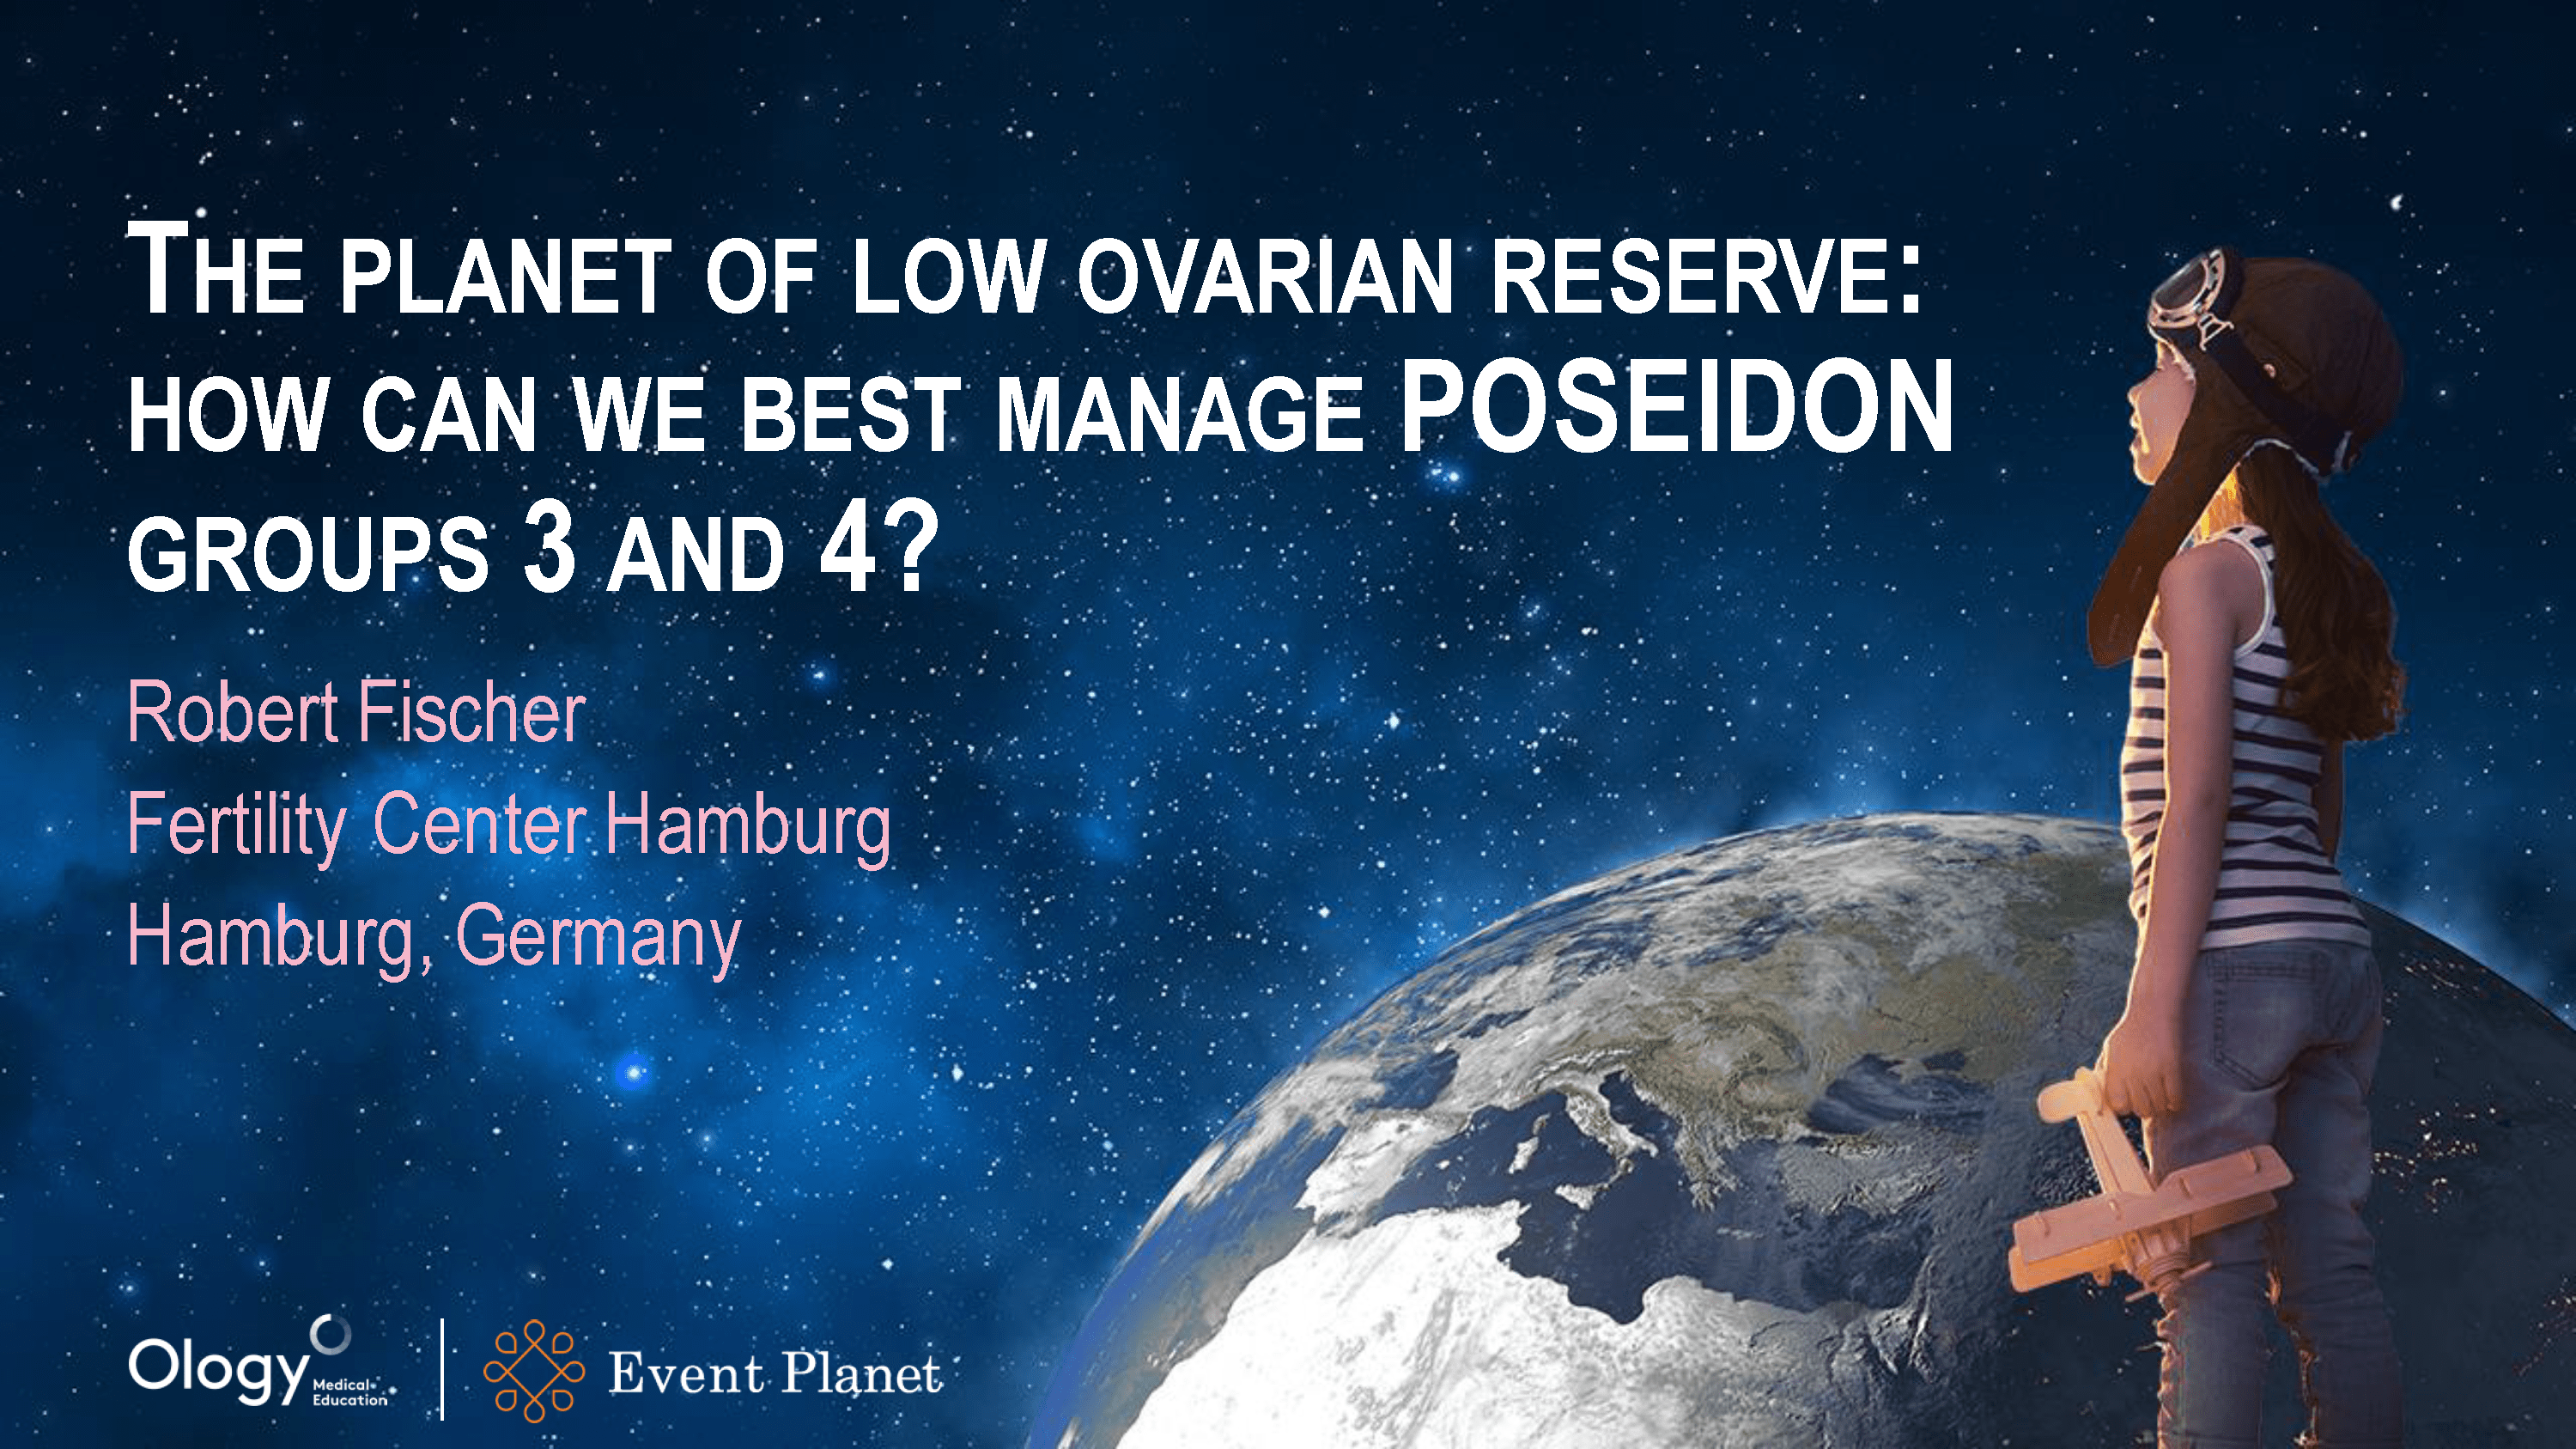 The planet of low ovarian reserve: how can we best manage POSEIDON groups 3 and 4? 